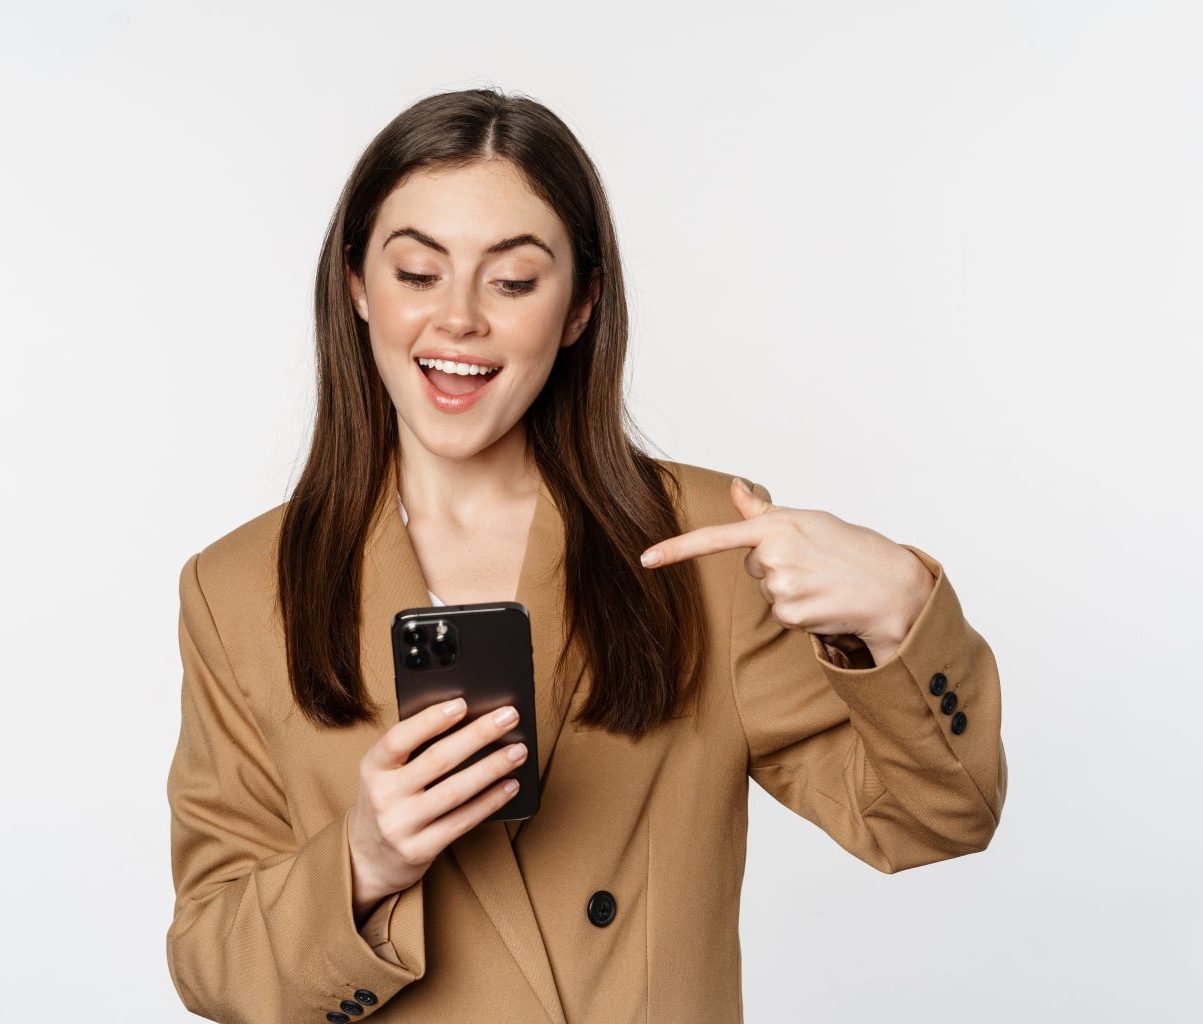 Enthusiastic saleswoman, business woman pointing finger at mobile phone and smiling, showing on cellphone, standing against white background.